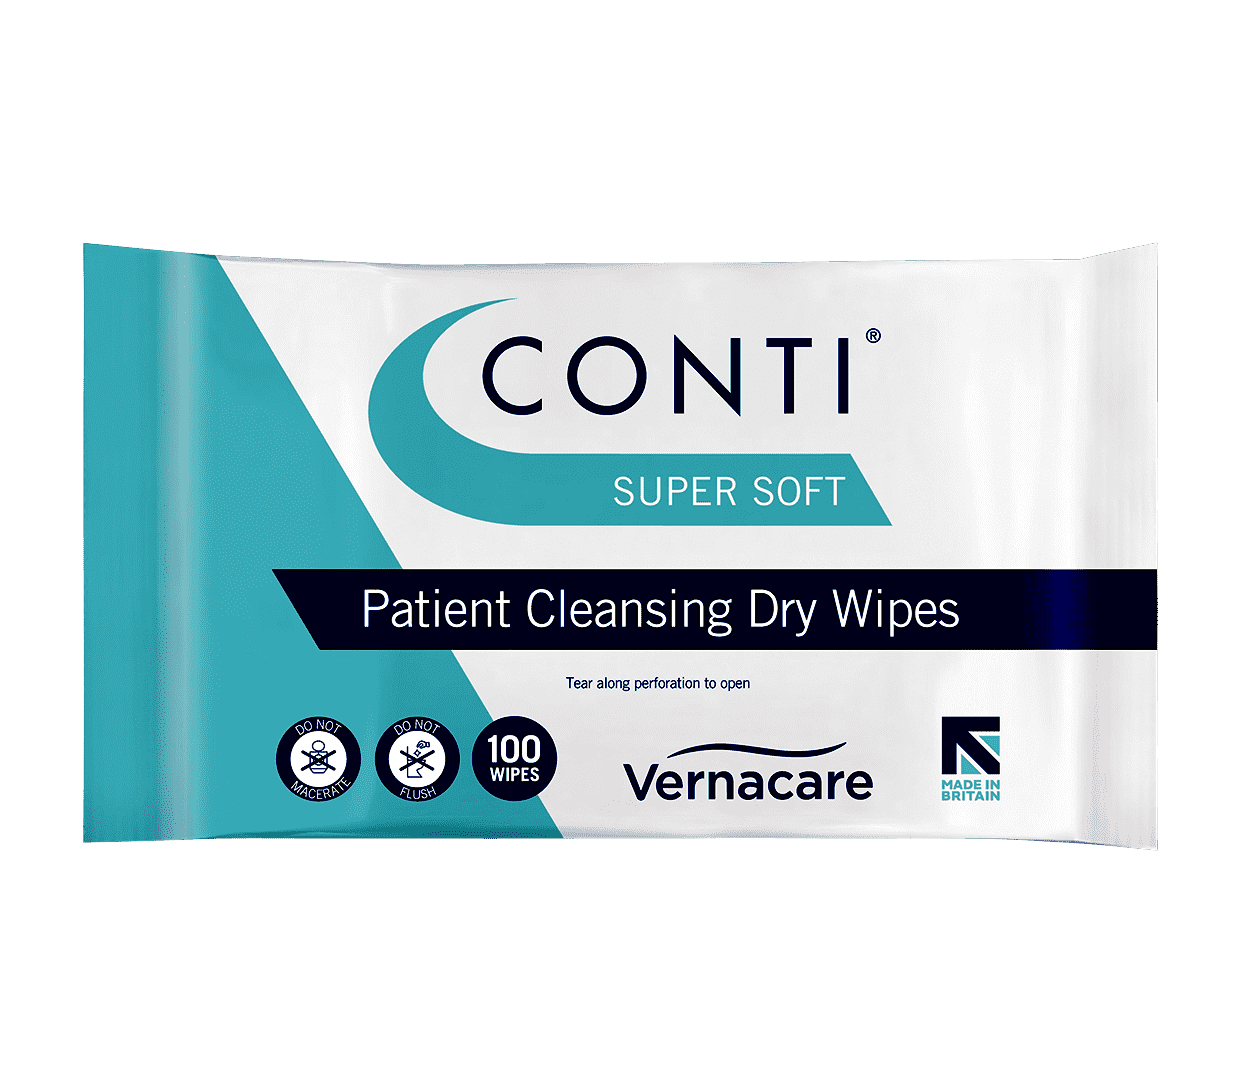 Dry wipes that are highly absorbent, which ensures skin is left dry without the need for vigorous rubbing and wiping. This type of patient cleansing dry wipe is suitable for use on sore, fragile skin.